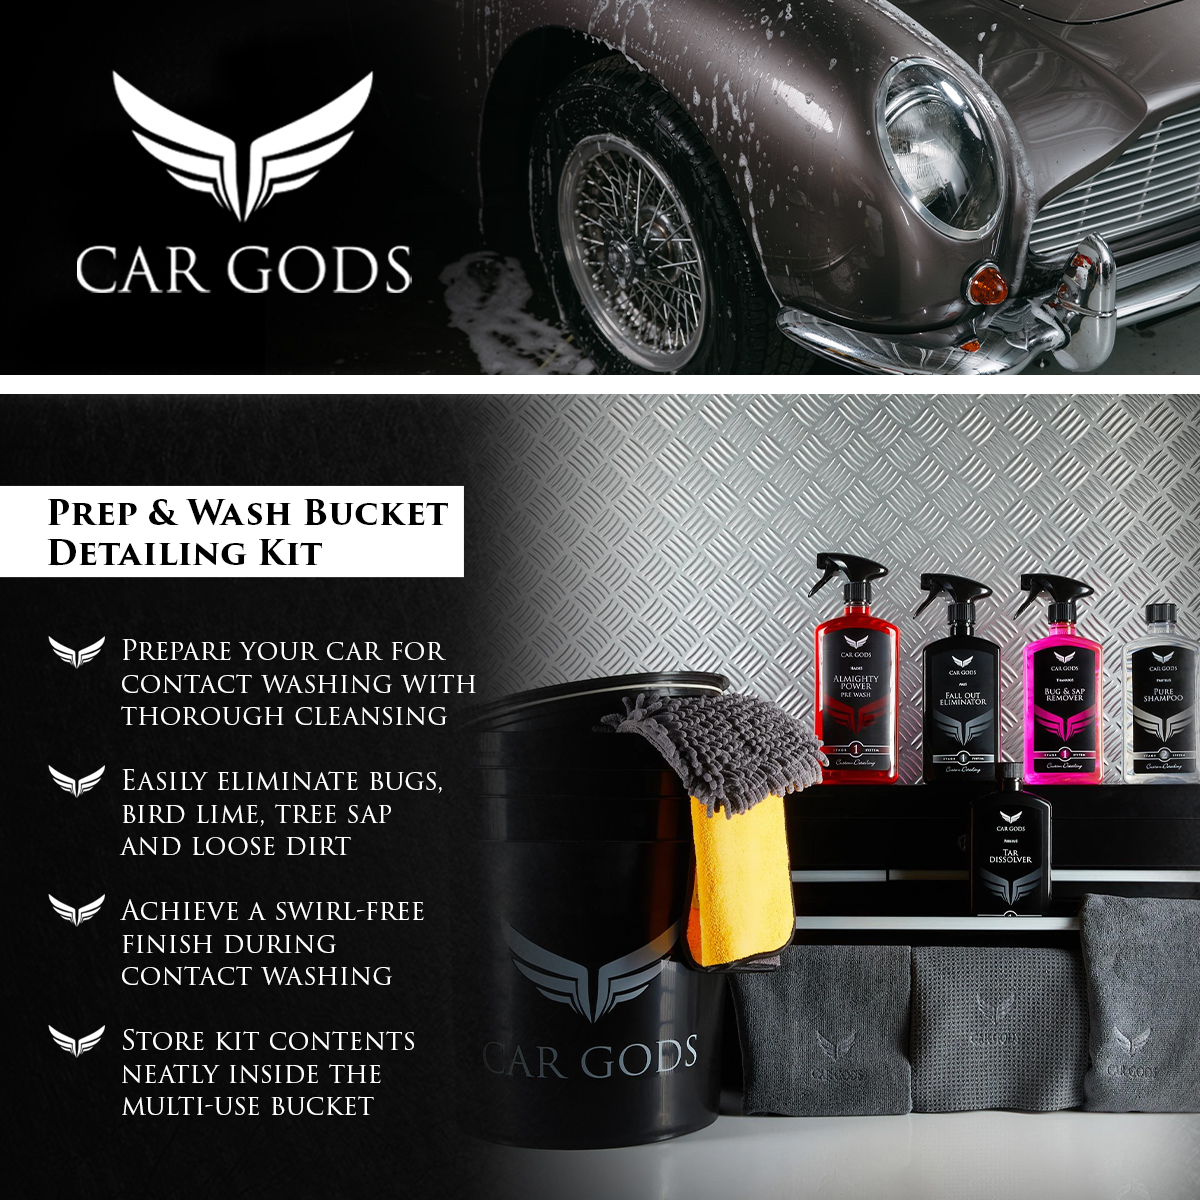 Car Gods Prep & Wash Bucket Detailing Kit. Prepare your car for contact washing with thorough cleansing, easily eliminate bugs, bird lime, tree sap and loose dirt, achieve a swirl-free finish during contact washing and store kit contents neatly inside the multi-use bucket.